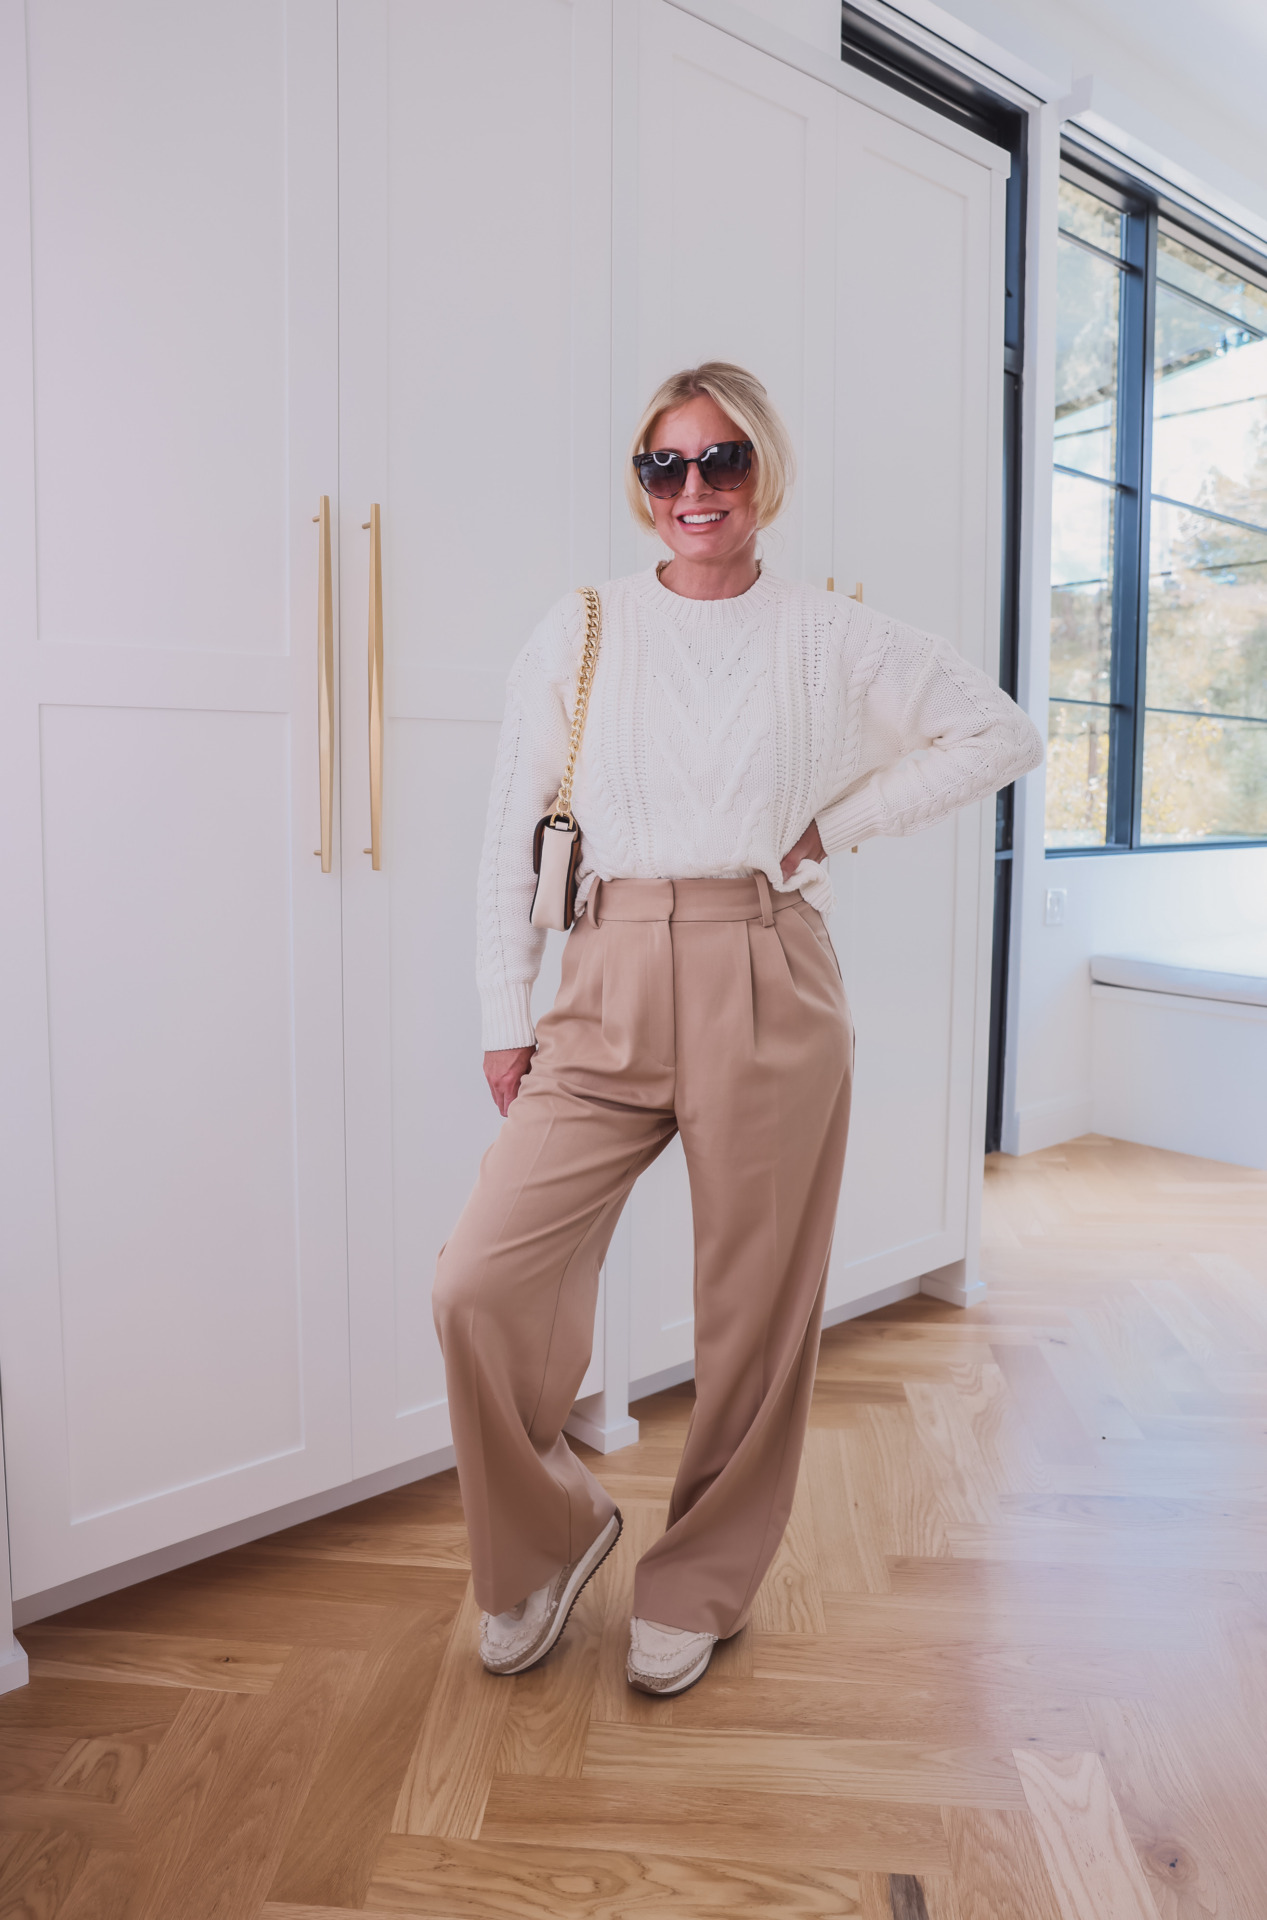 how to wear pleated pants, ways to wear pleated pants, ways to style pleated pants, how to style pleated pants, pleated trousers women, pleated pants over 40, favorite daughter pleated pants, pleated pants 2023, pleated pants outfits, erin busbee, busbee style, fashion over 40, pistola white cable knit sweater, rag & bone espadrille sneakers, le spec sunglasses, marc jacobs tri-color handbag, best items from shopbop sale, best shopbal sale items, shopbop sale, fall shopbop sale